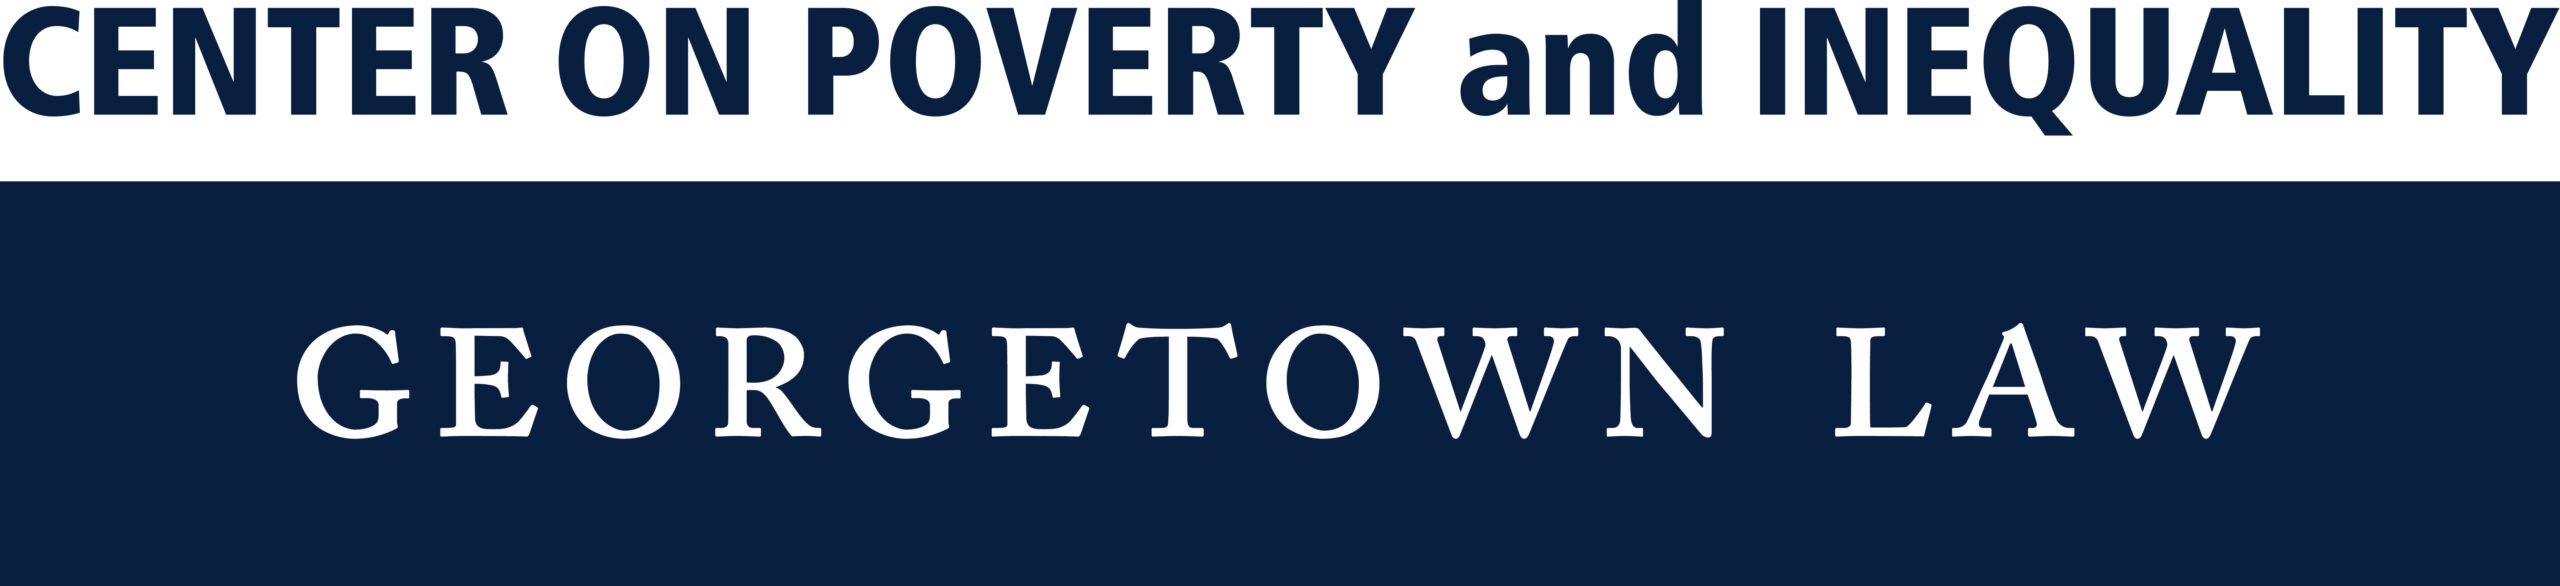 Georgetown Center on Poverty and Inequality